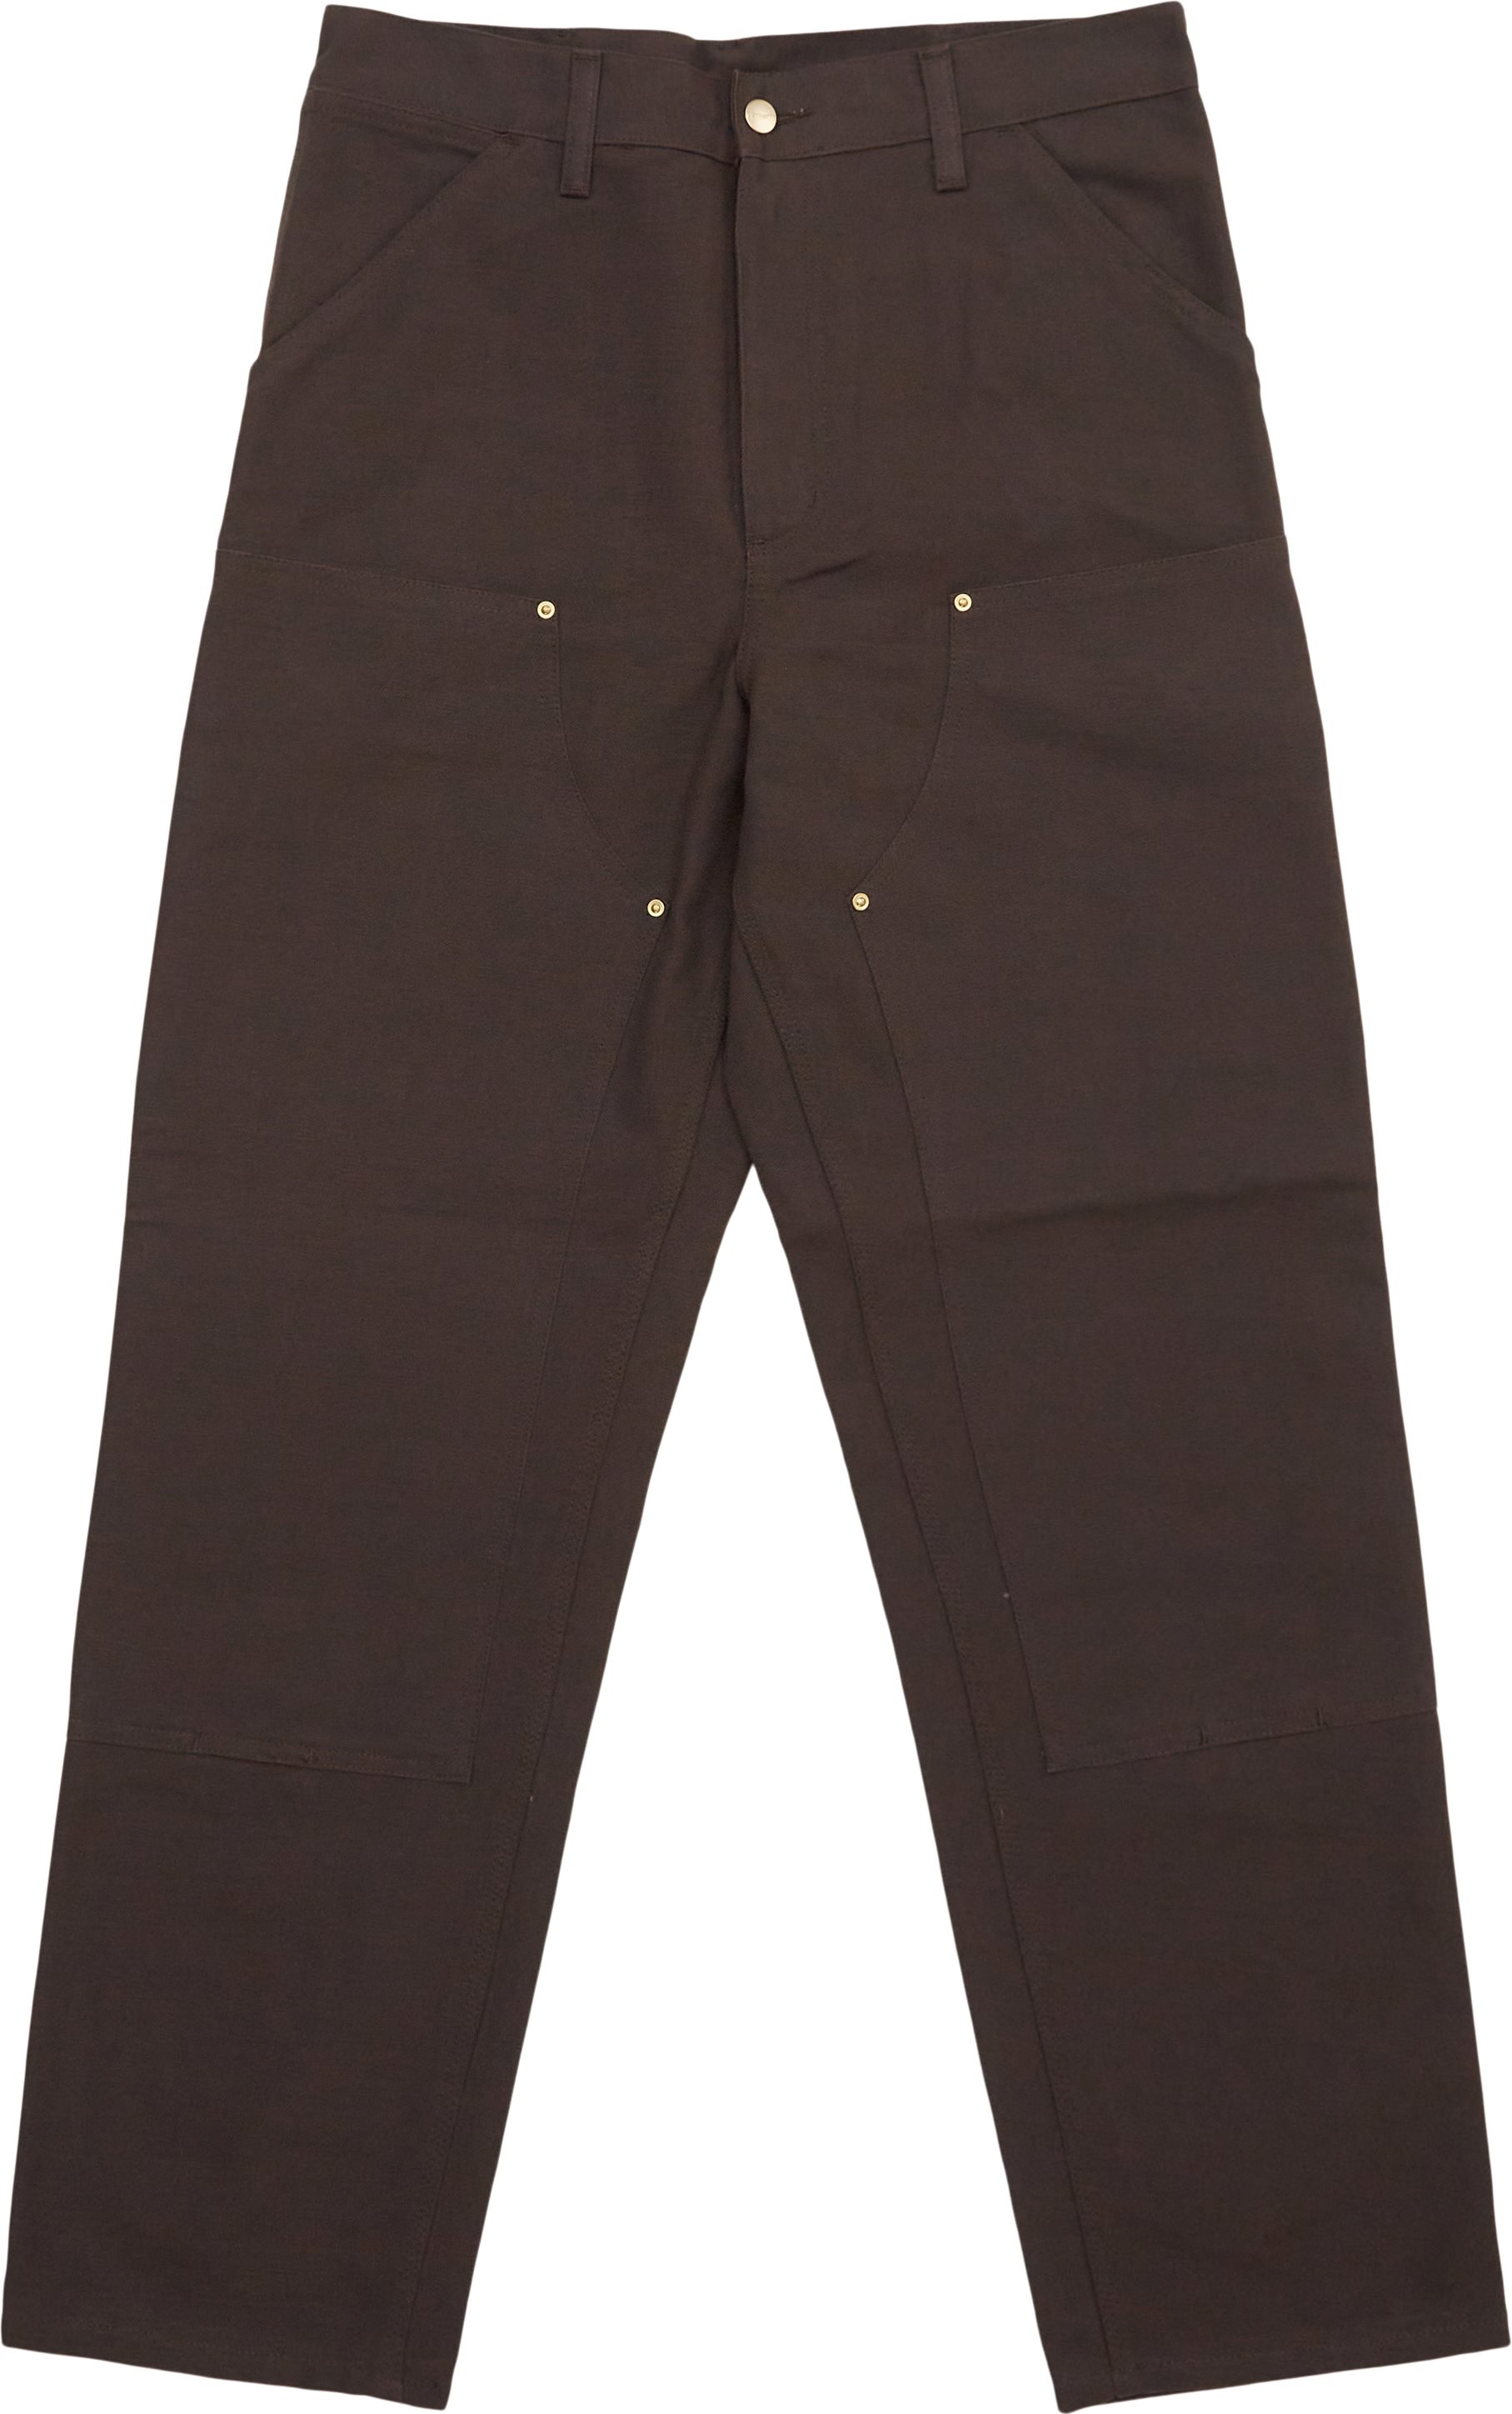 Carhartt WIP Trousers DOUBLE KNEE I031501.4701 Brown